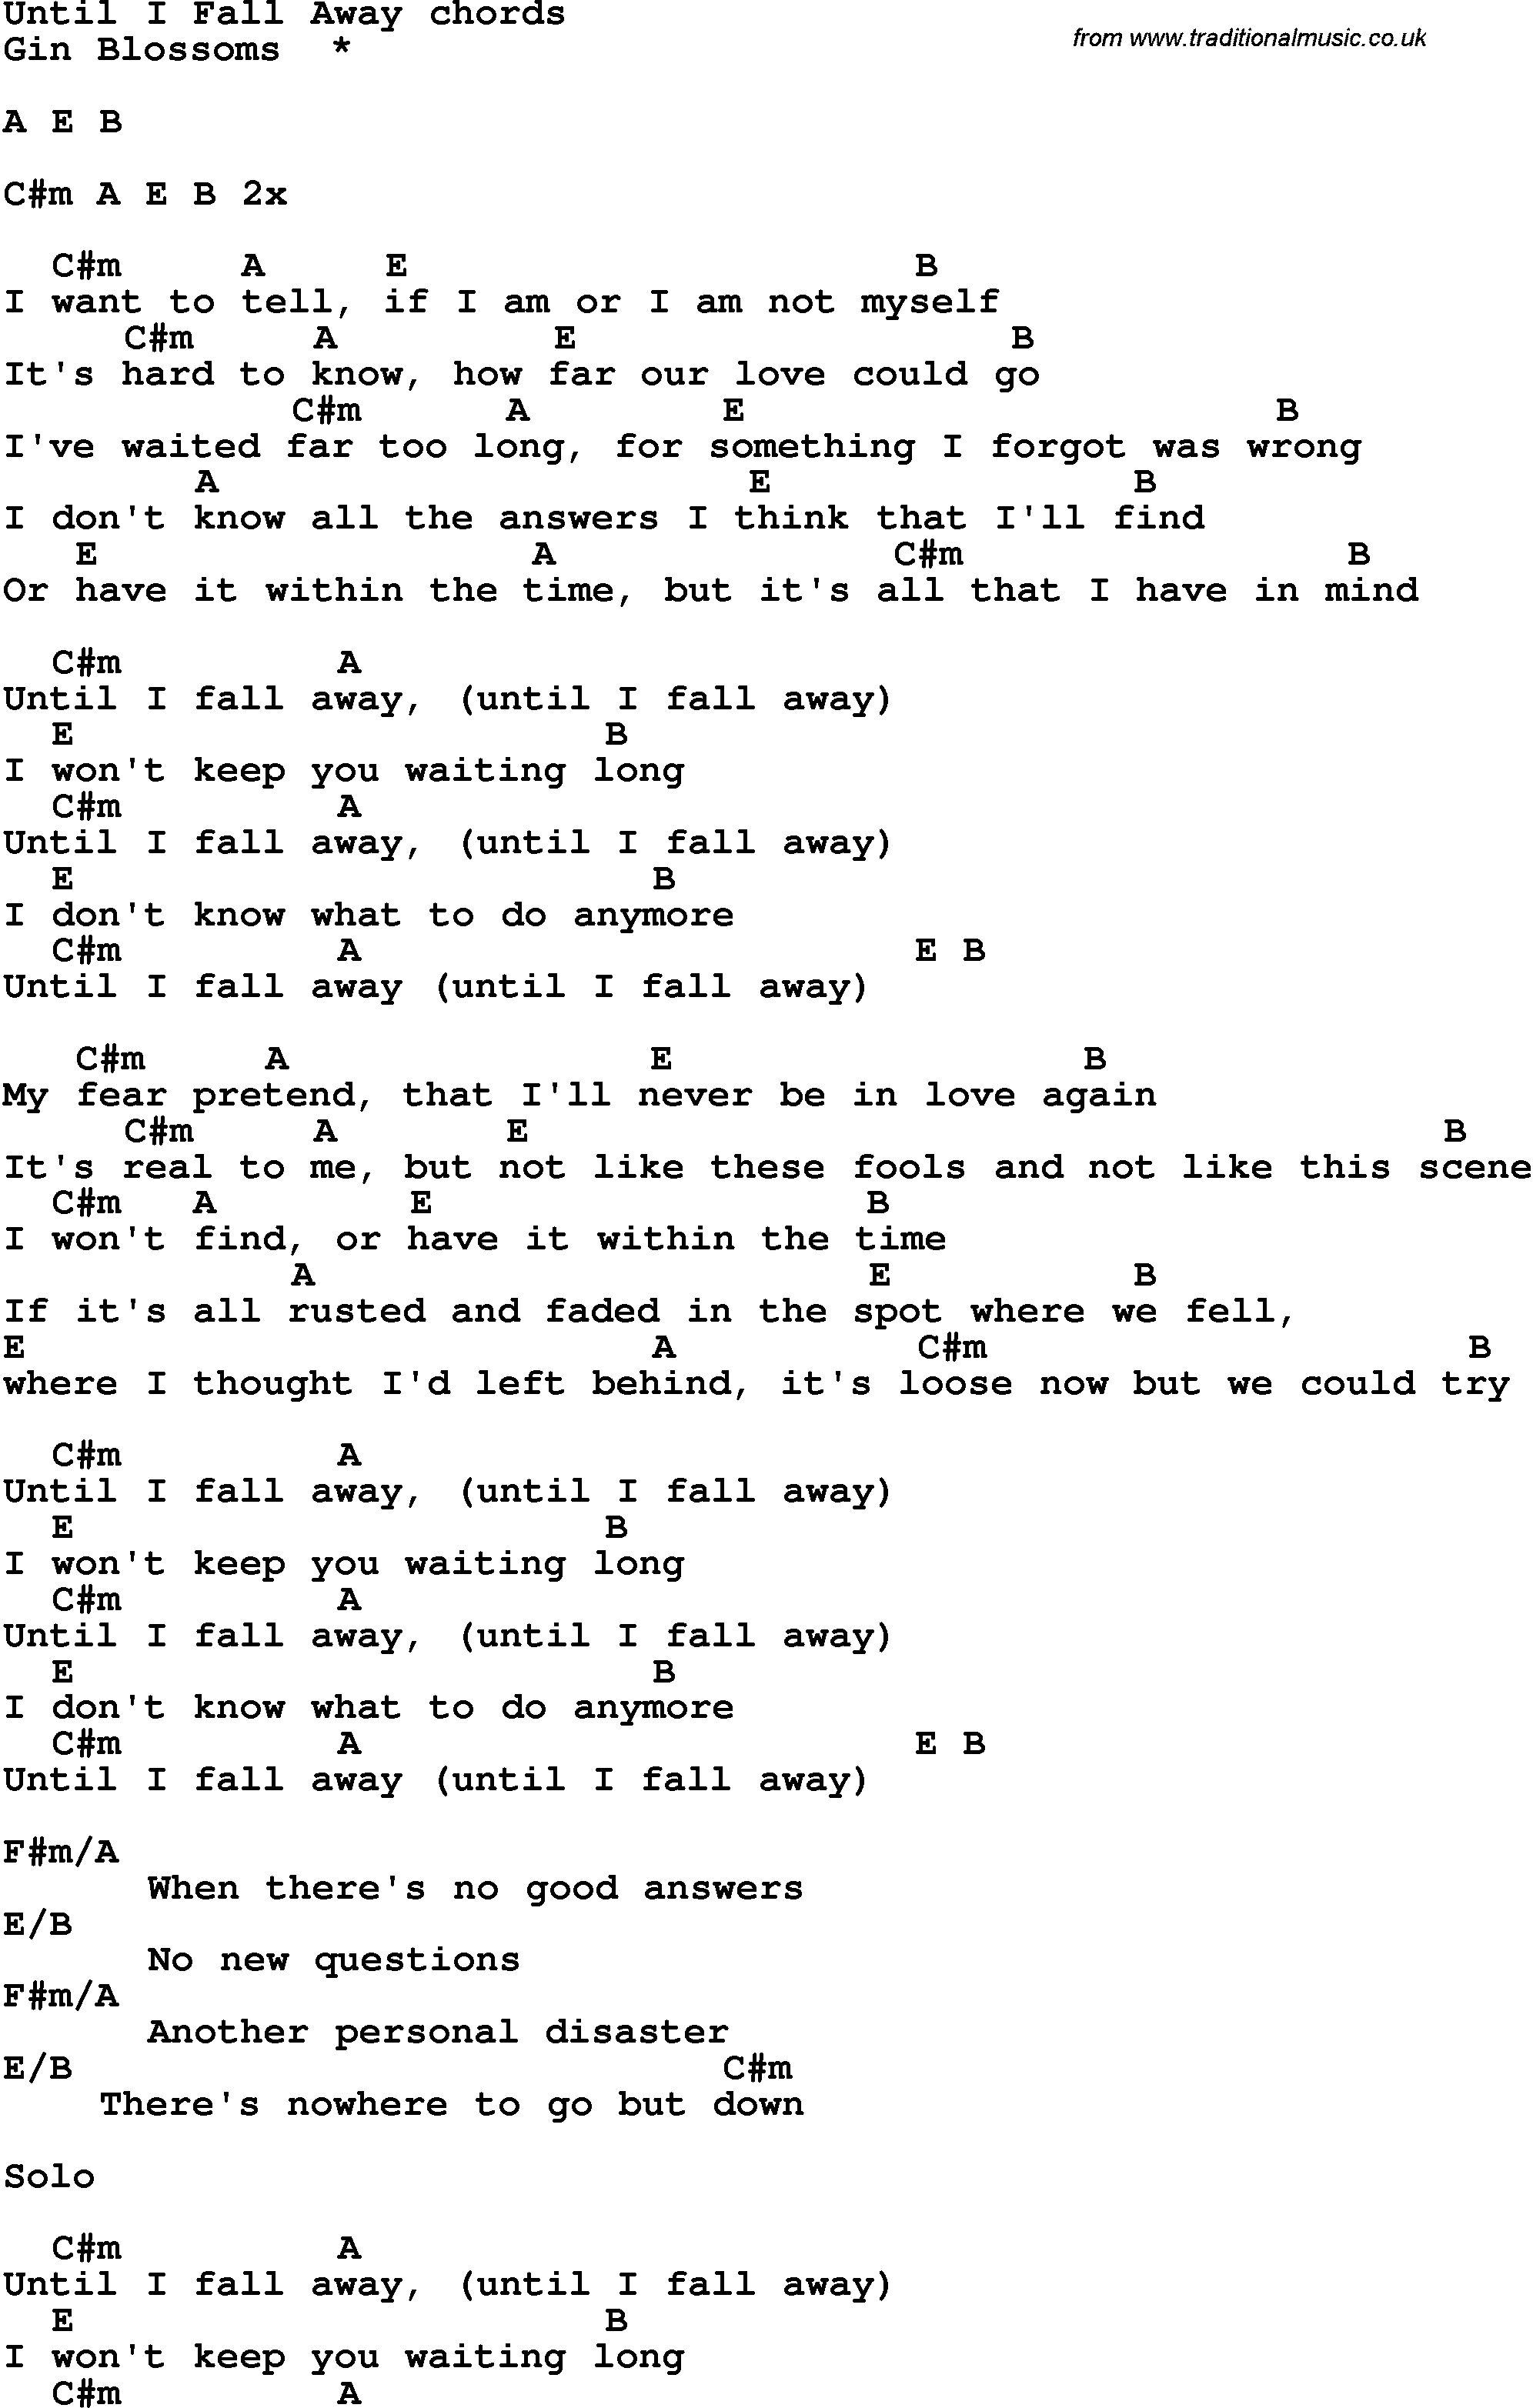 Song Lyrics with guitar chords for Until I Fall Away